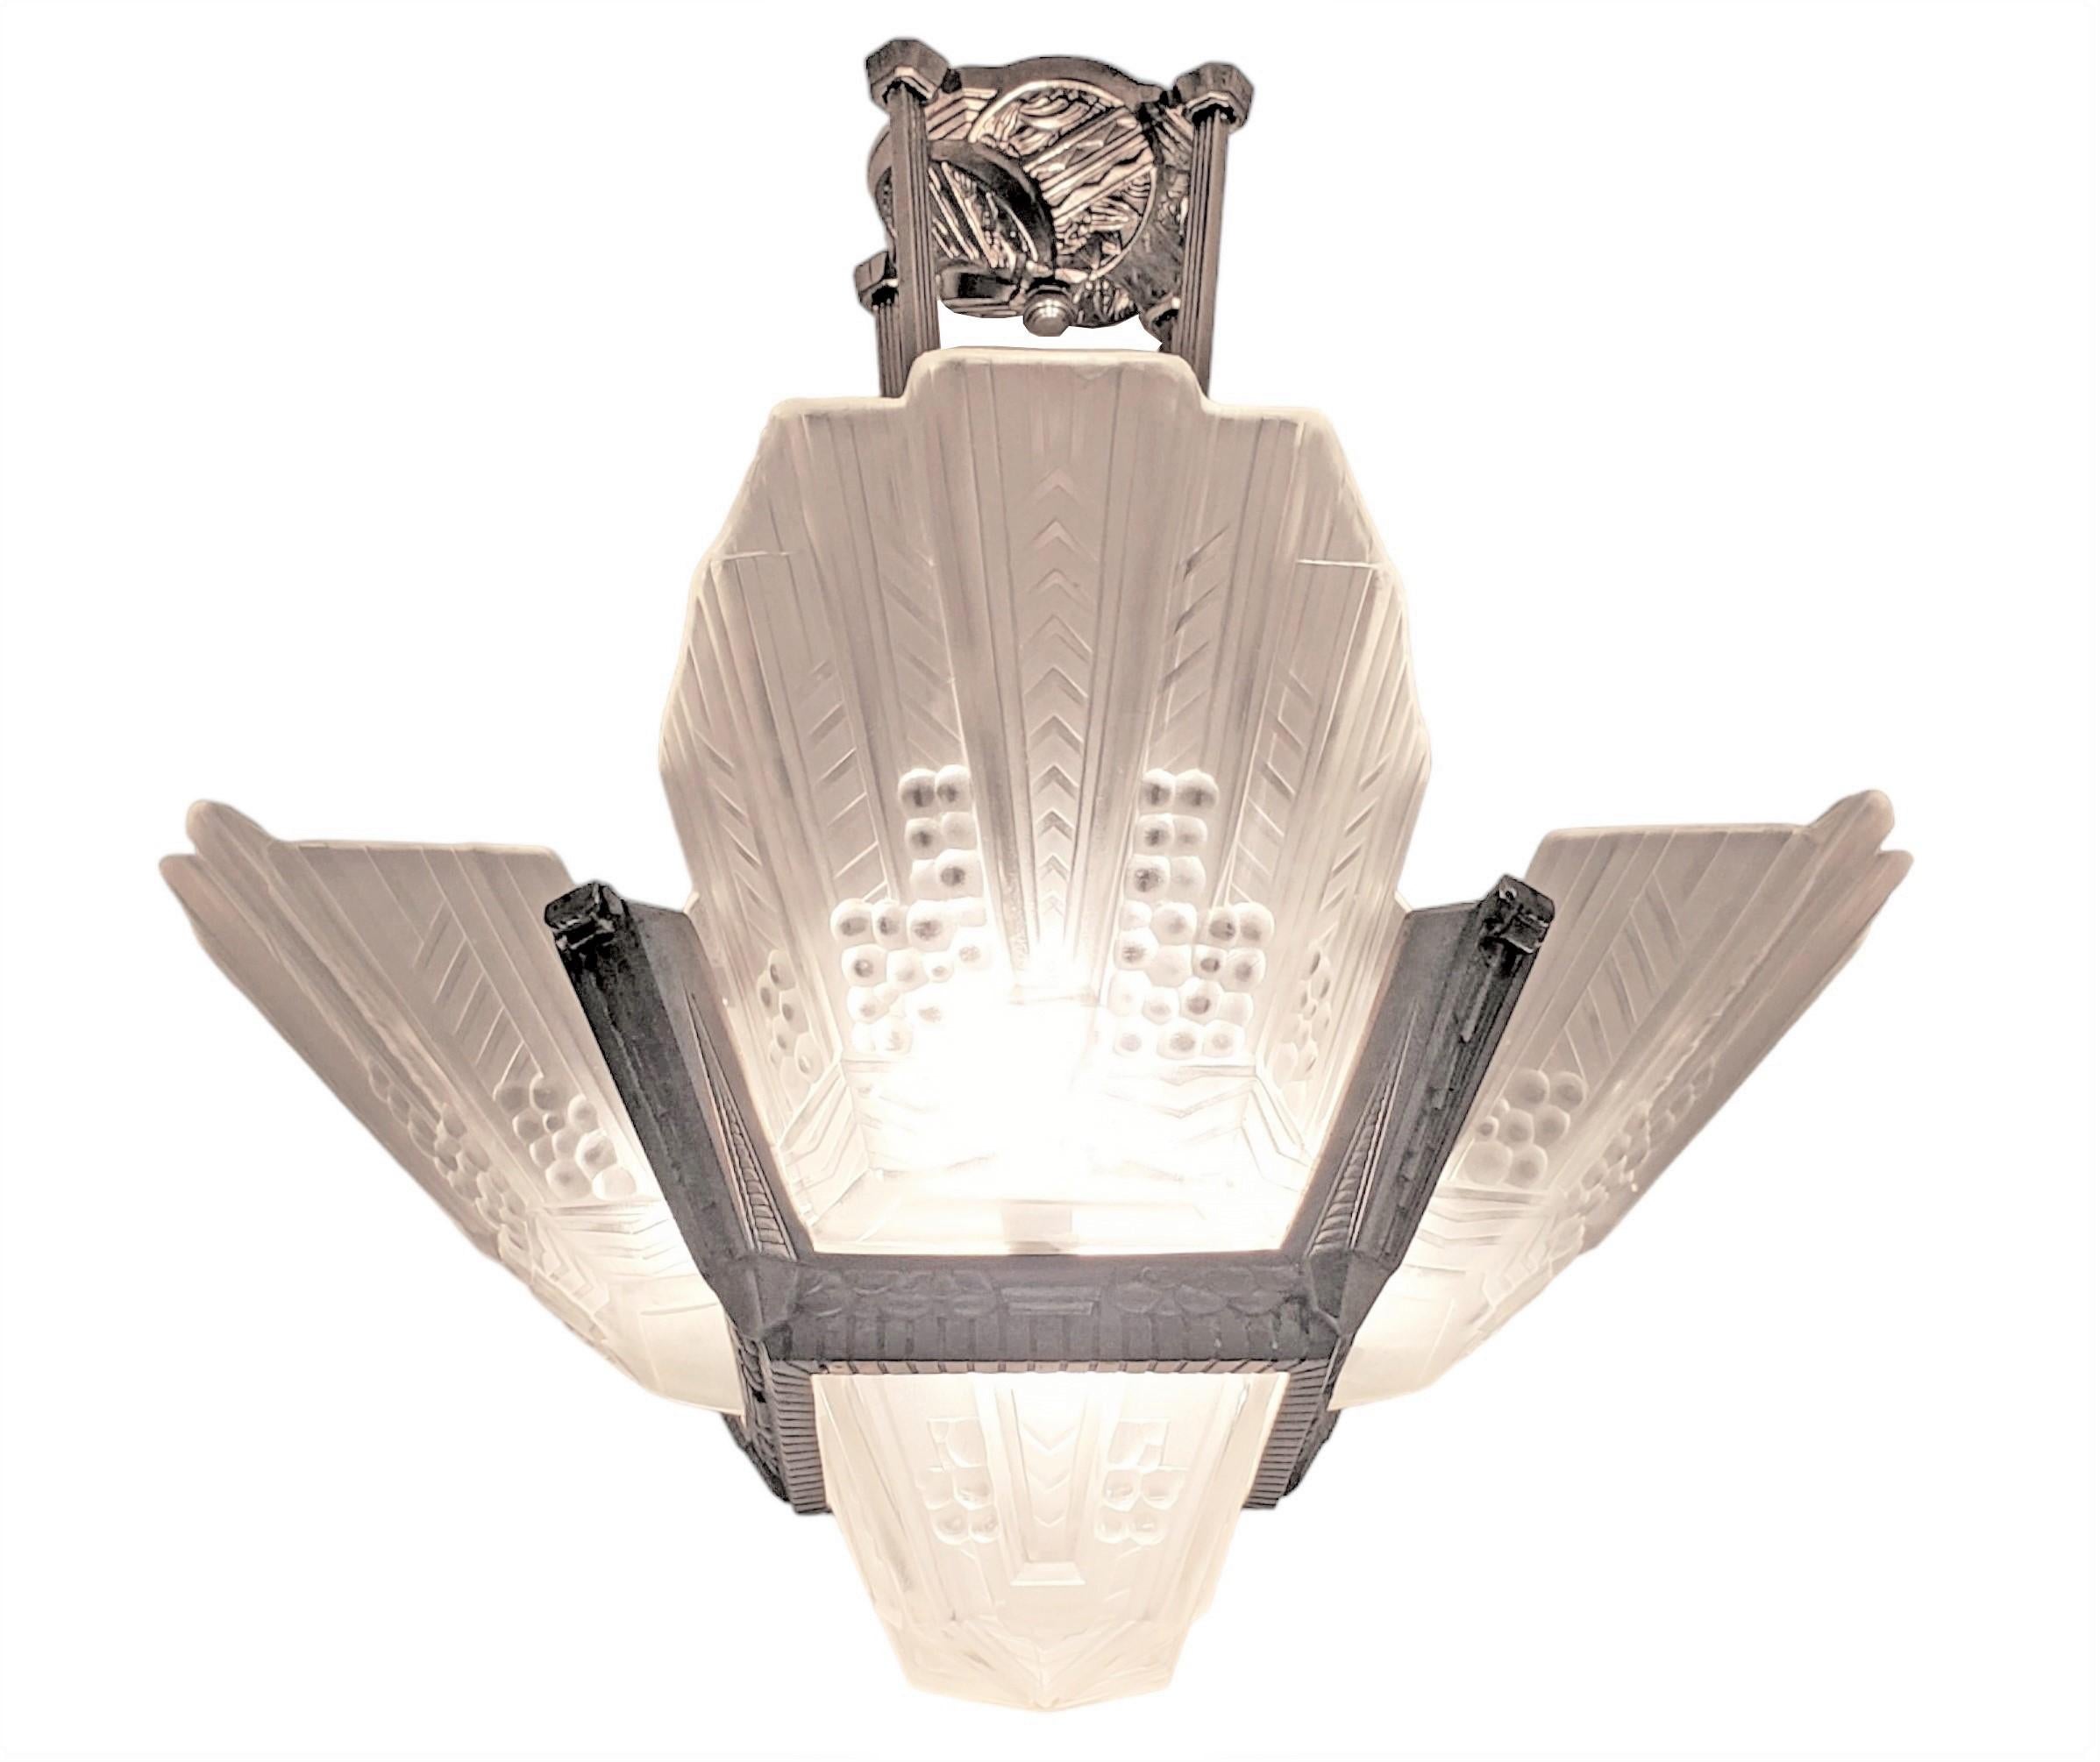  
Fabulous French Art Deco geometric motif chandelier featuring four frosted and molded art glass panels with stylized wheat design,  chevron, stepped tops and polished details,
 attributed to EJG,  Etablissements Jean Gauthier. 
The architectural